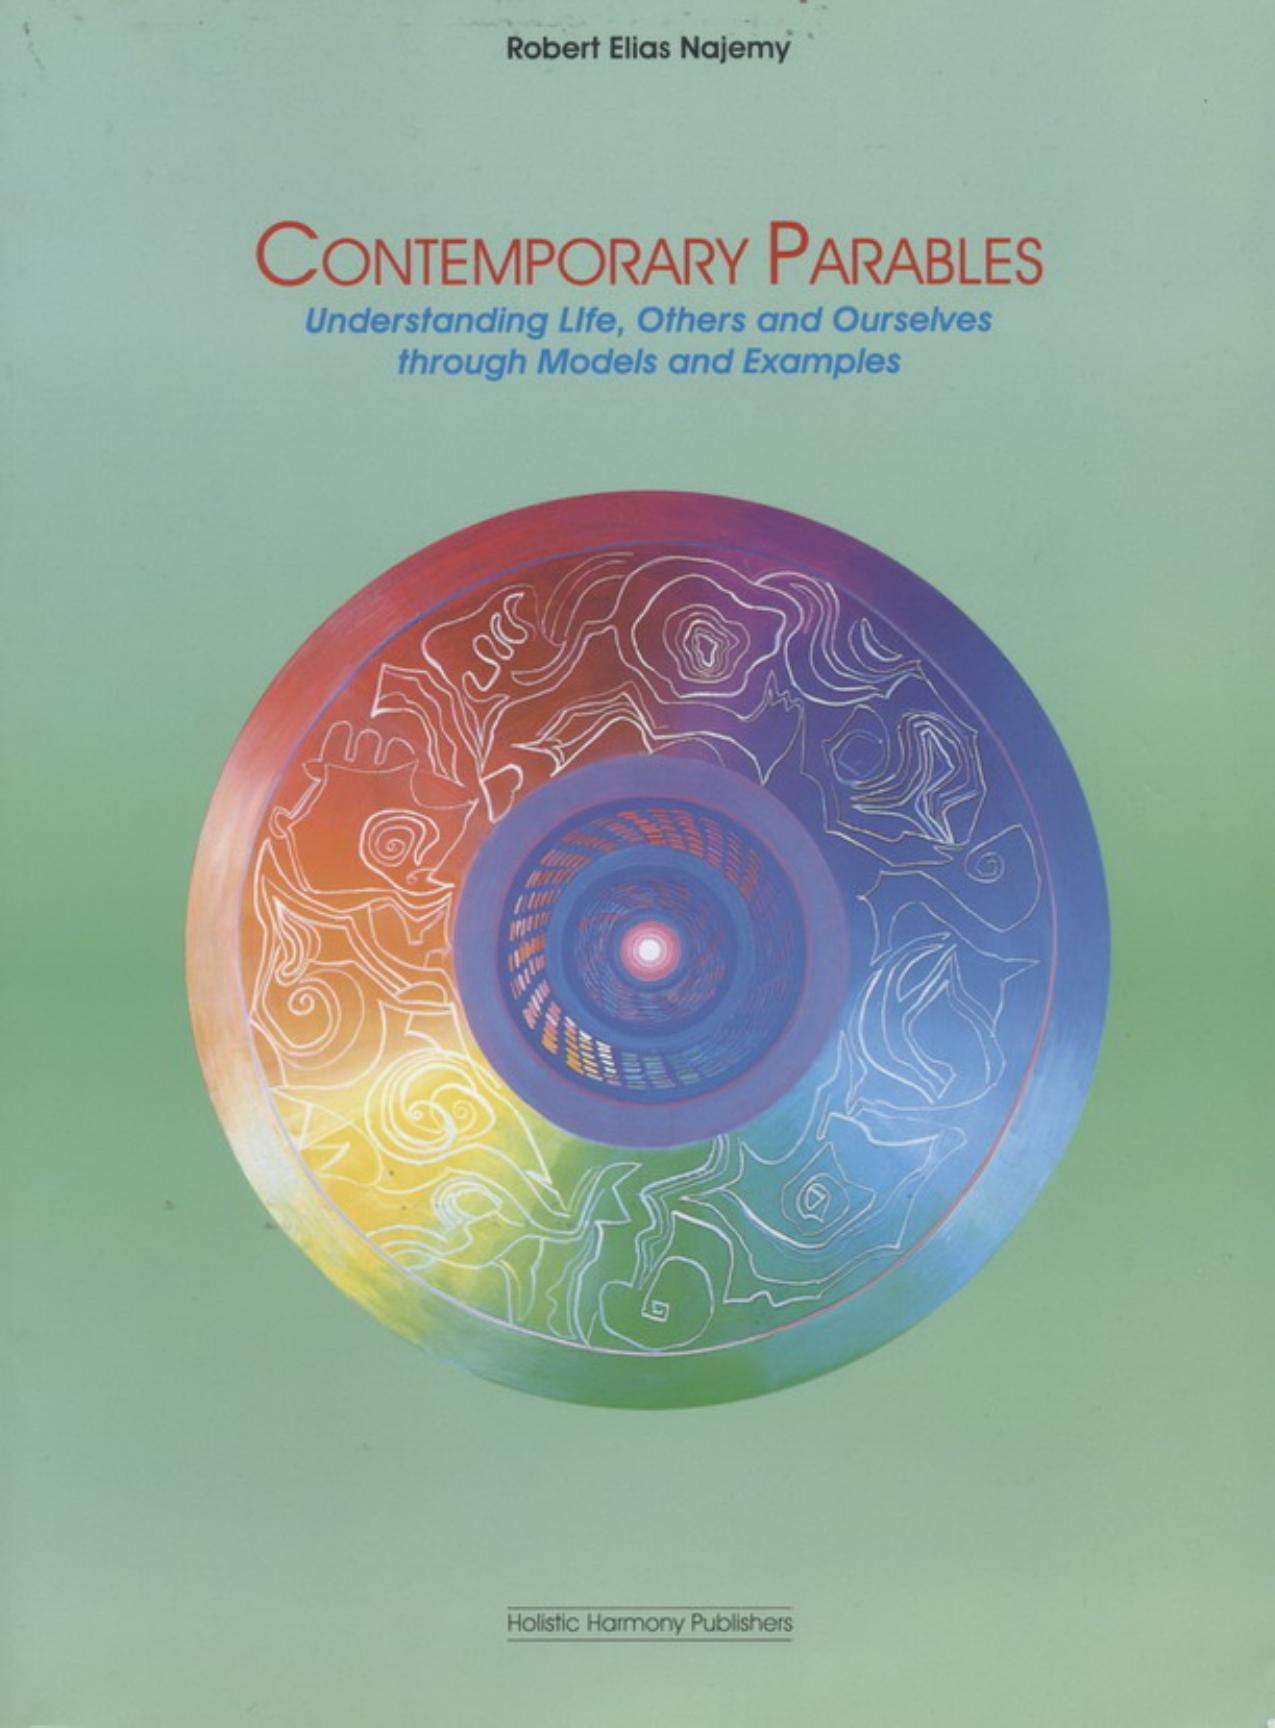 Contemporary Parables : Understanding Life, Others and Ourselves through Models and Examples by Robert Elias Najemy